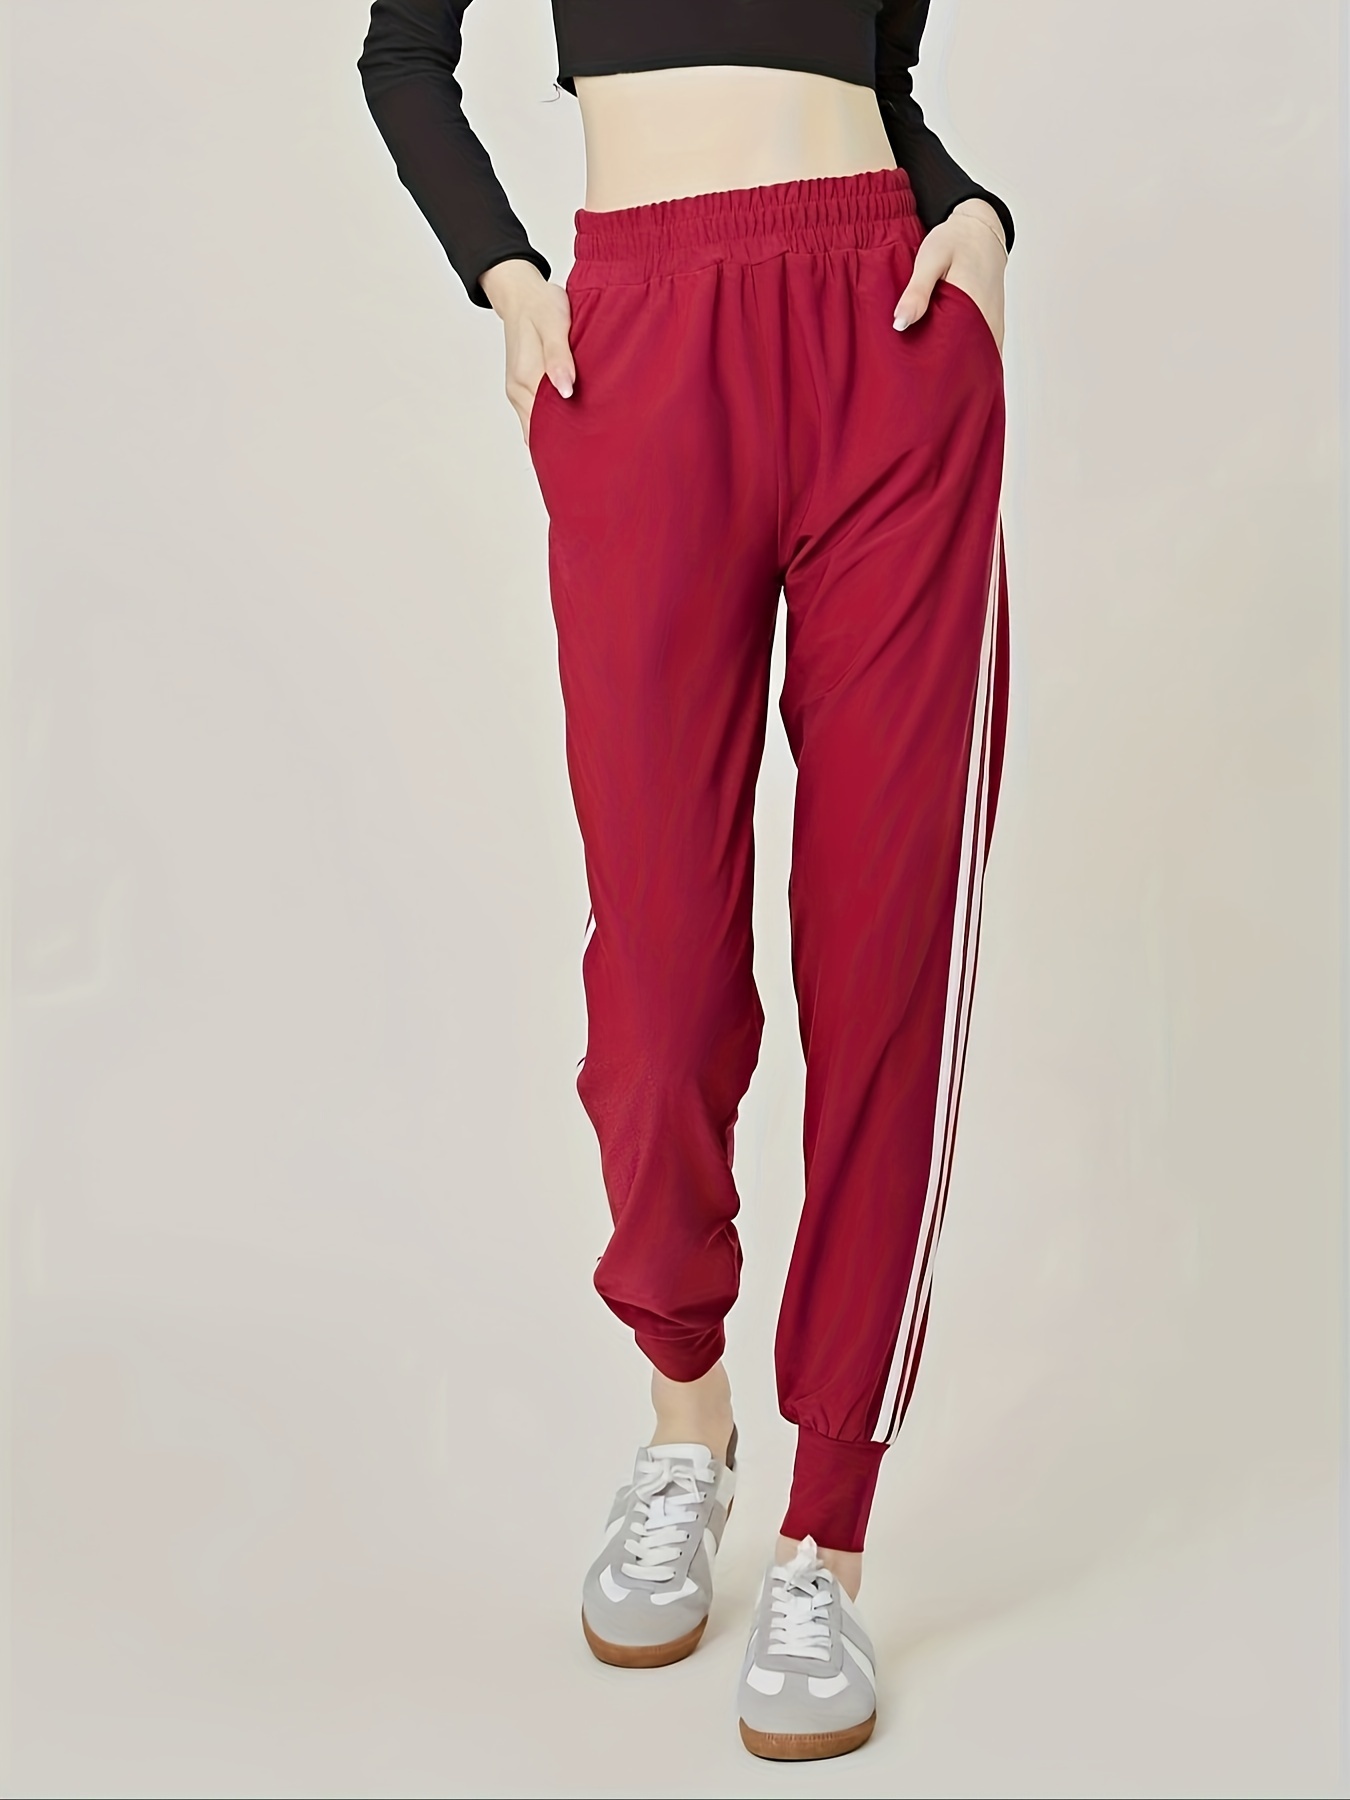 High Waisted Cinch Bottom Sweatpants for Teen Girls and Women, Lightweight  Joggers with Pockets